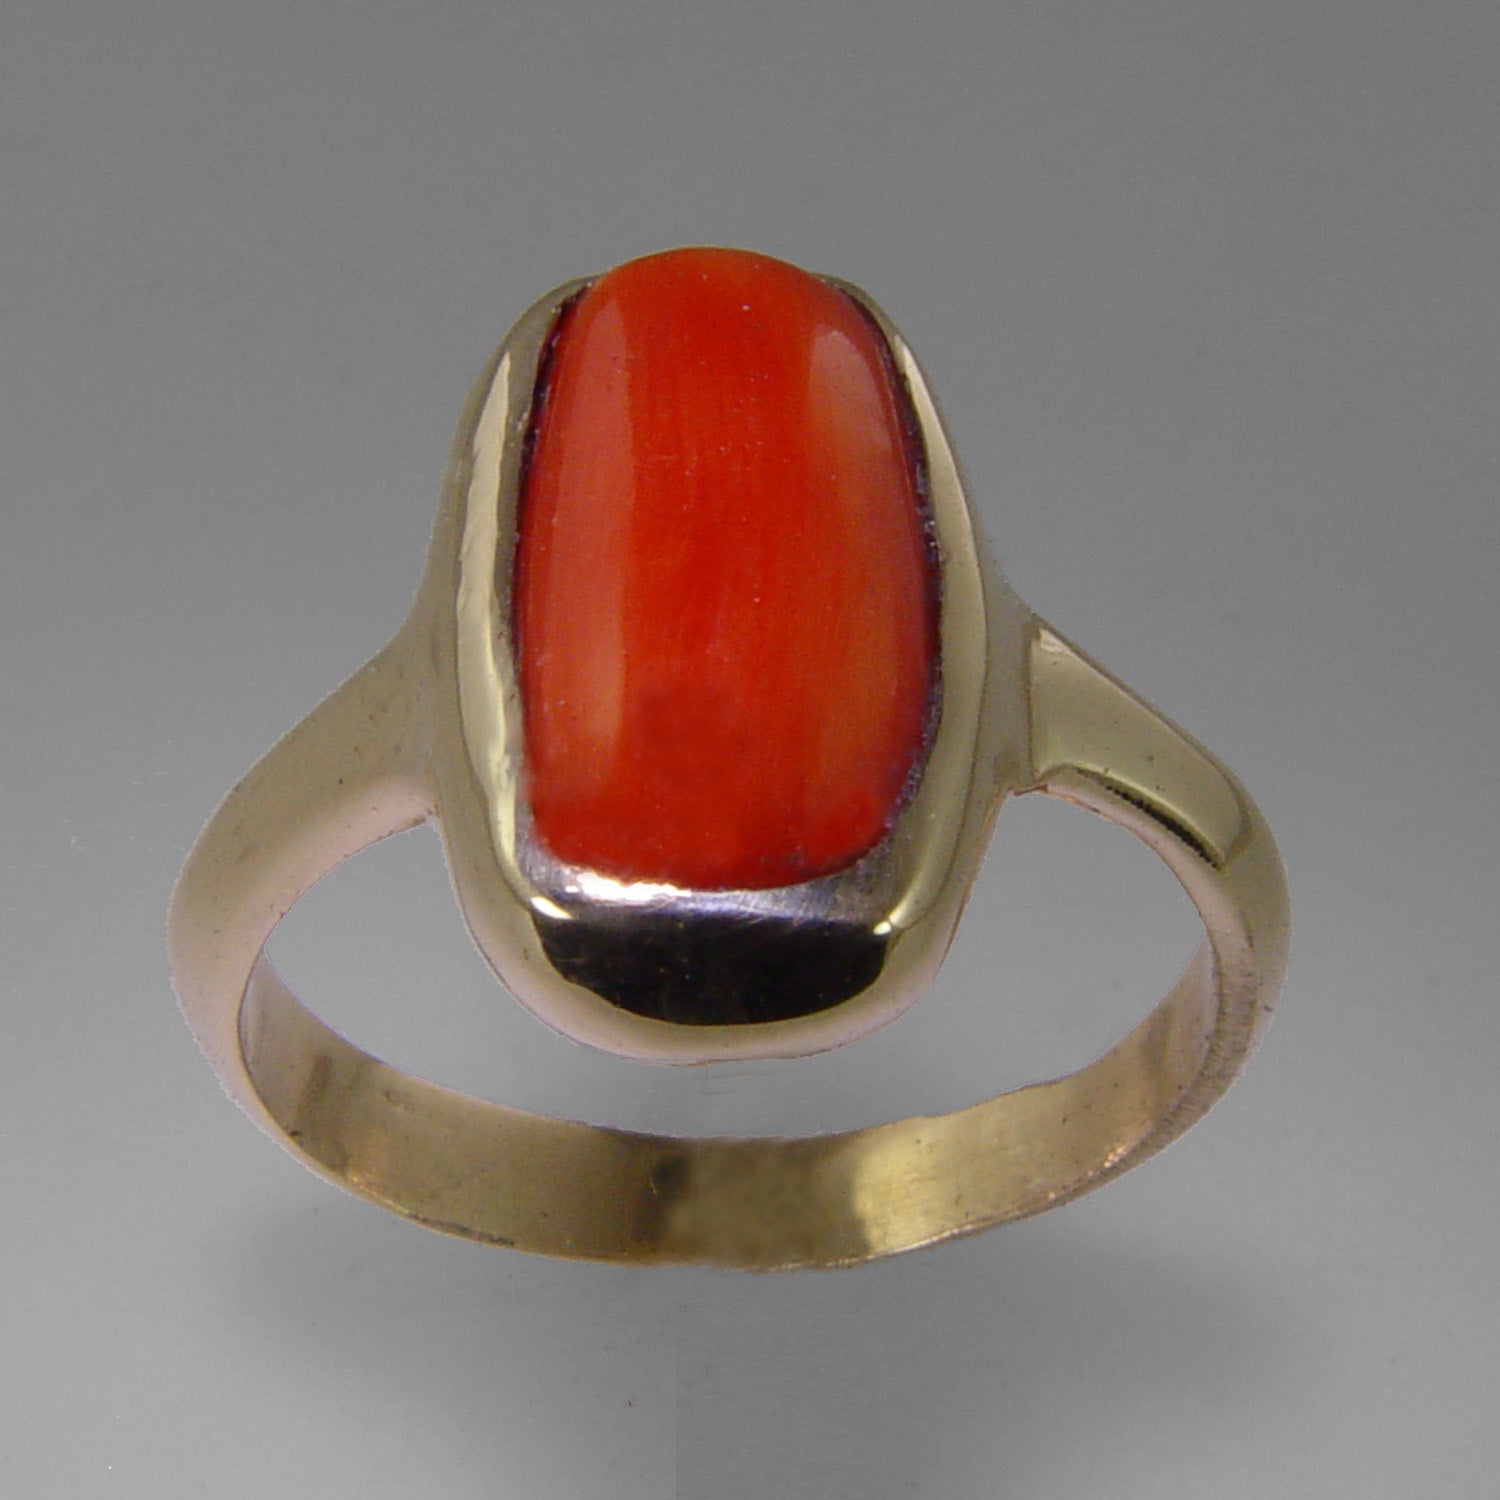 Red Coral 5.89 ct Cab Bezel Set 14KY Gold Ring, Size 8